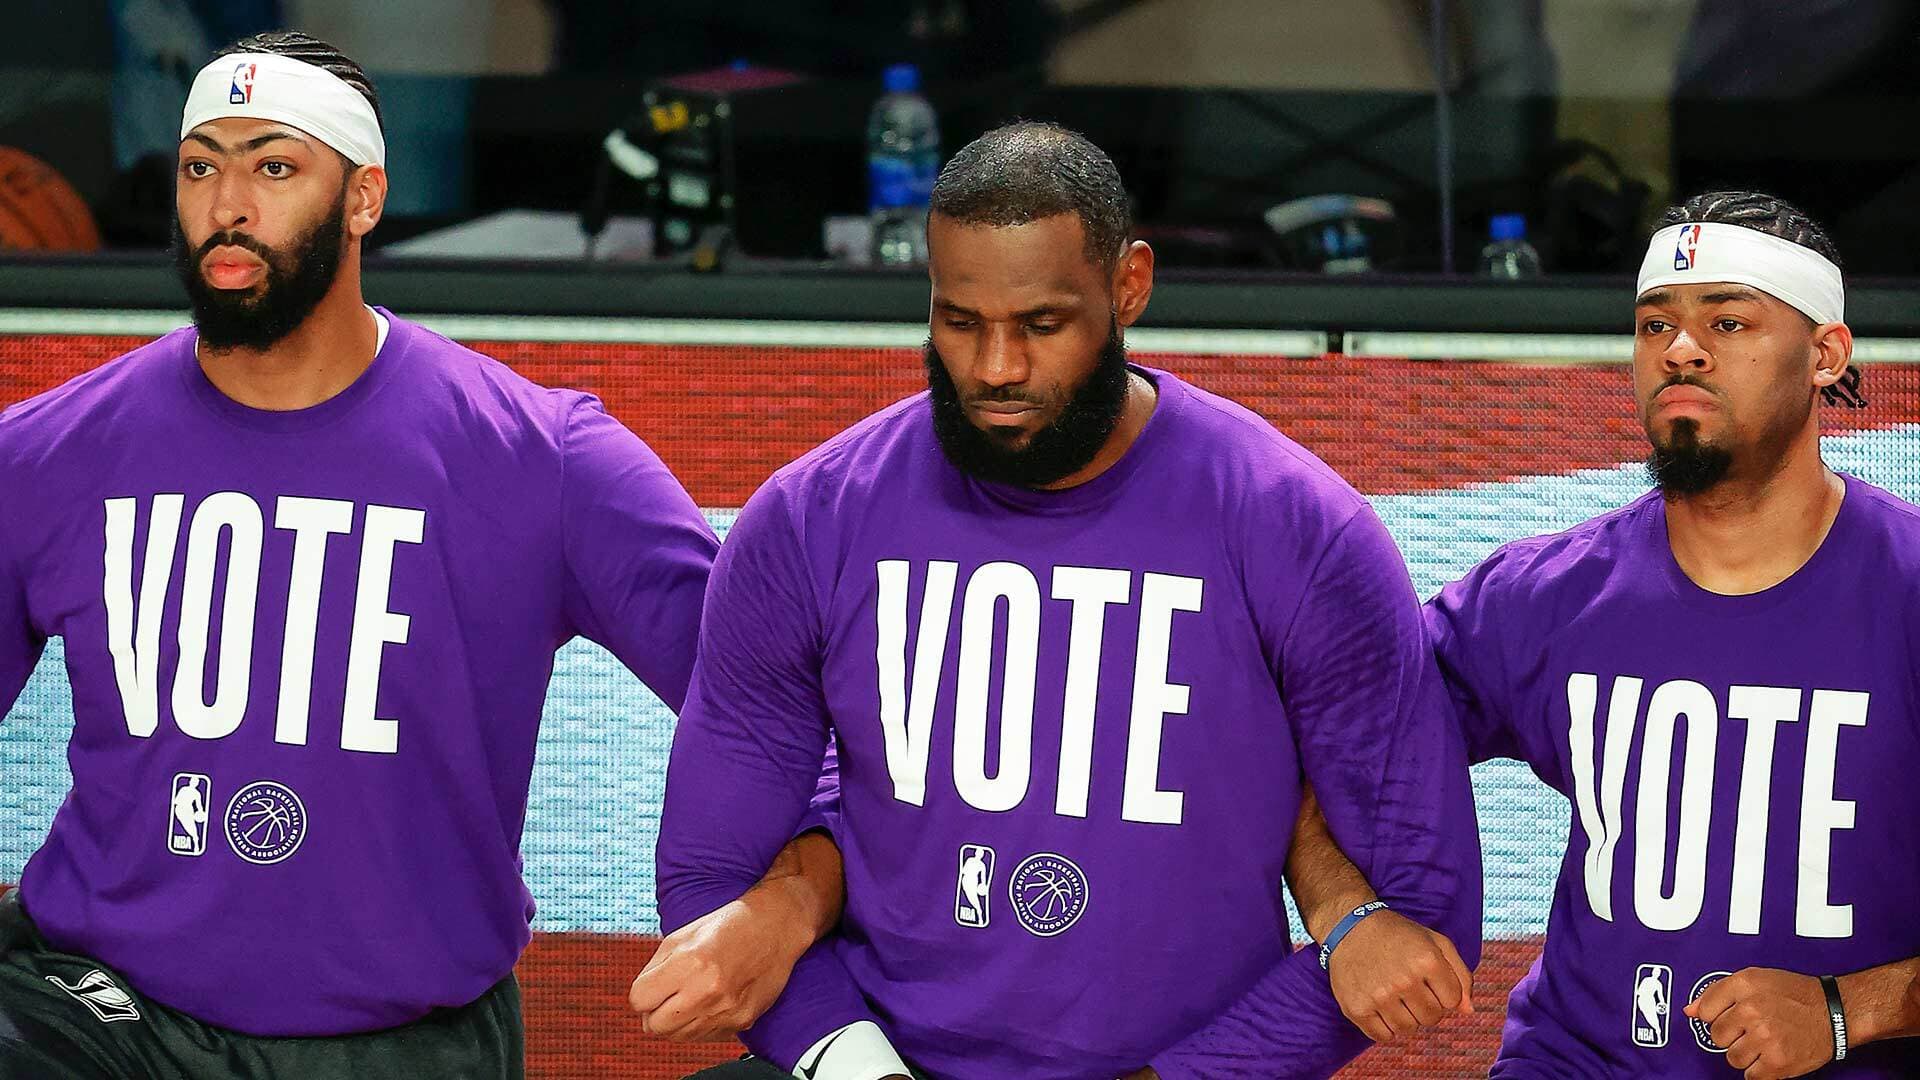 Basketball players linking arms while wearing purple jerseys that say "vote"